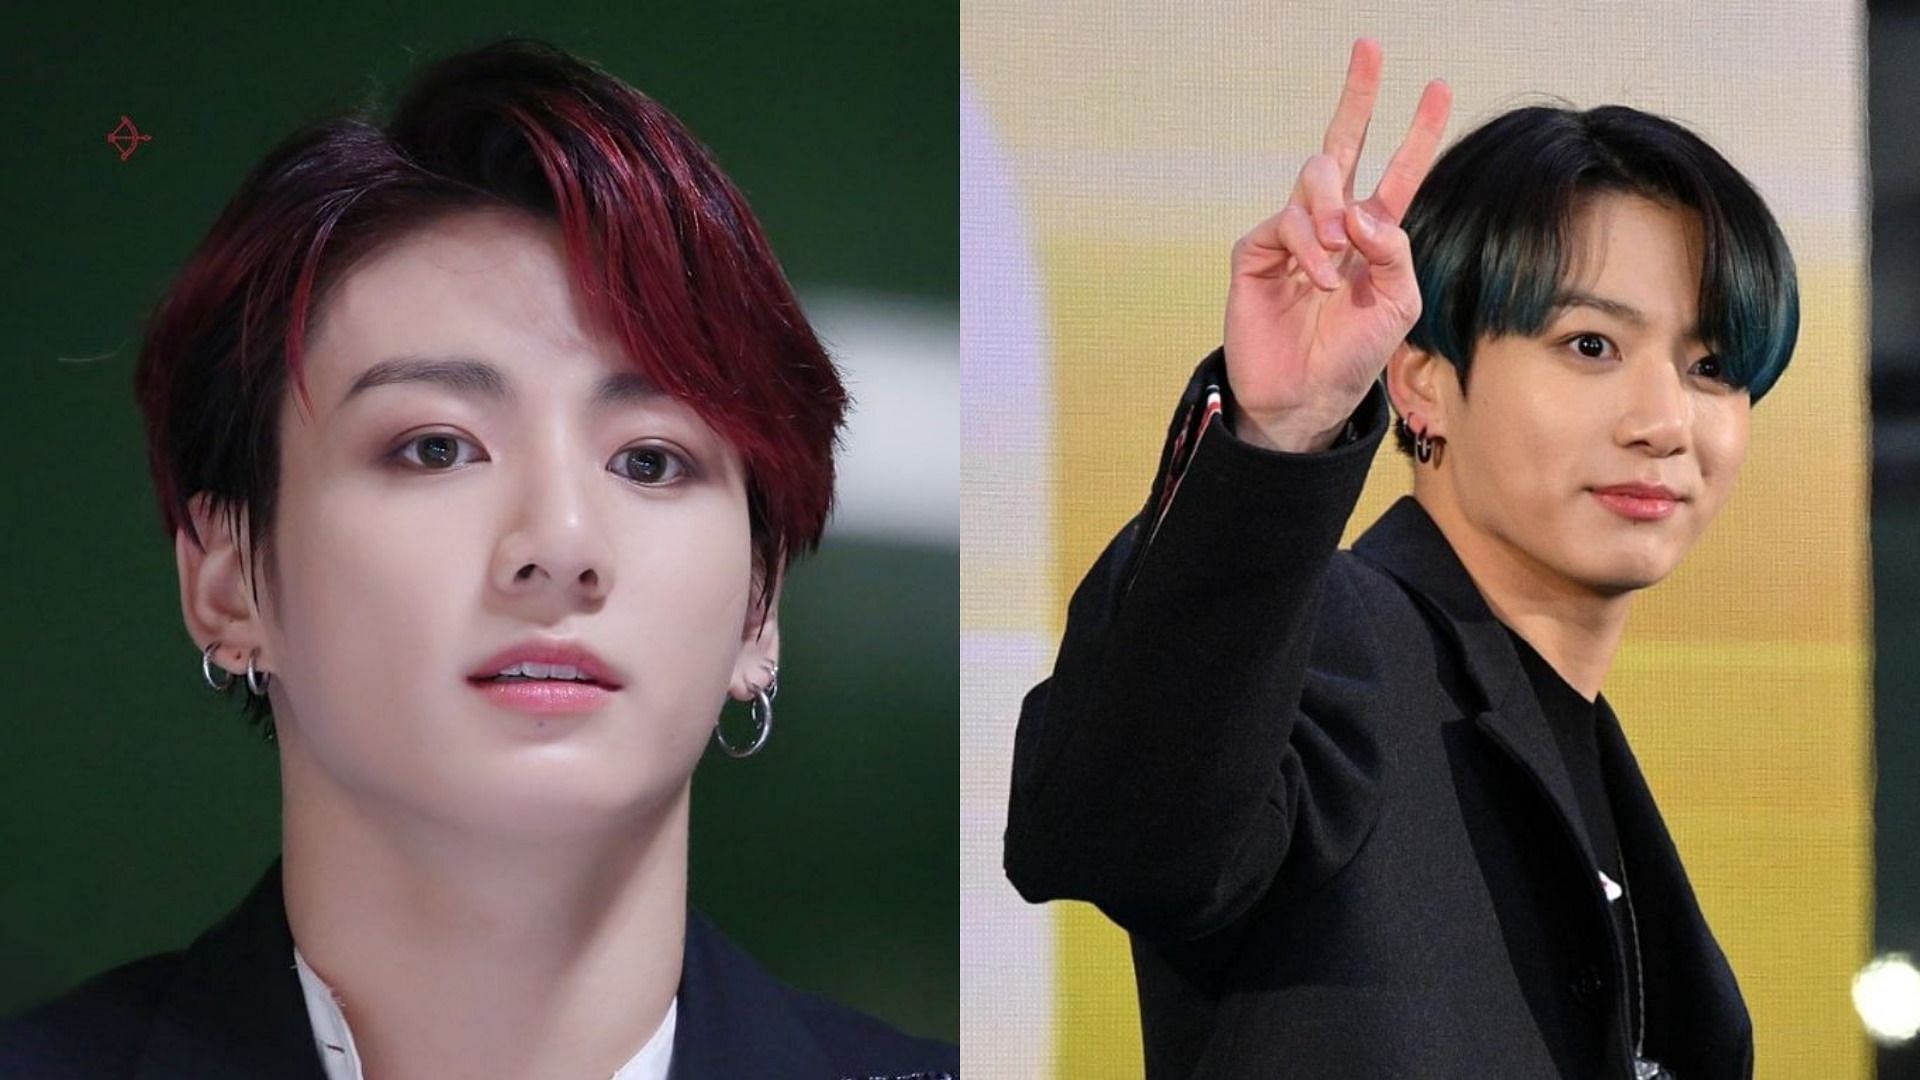 BTS Jungkook graduates from Global Cyber University with a Presidential award